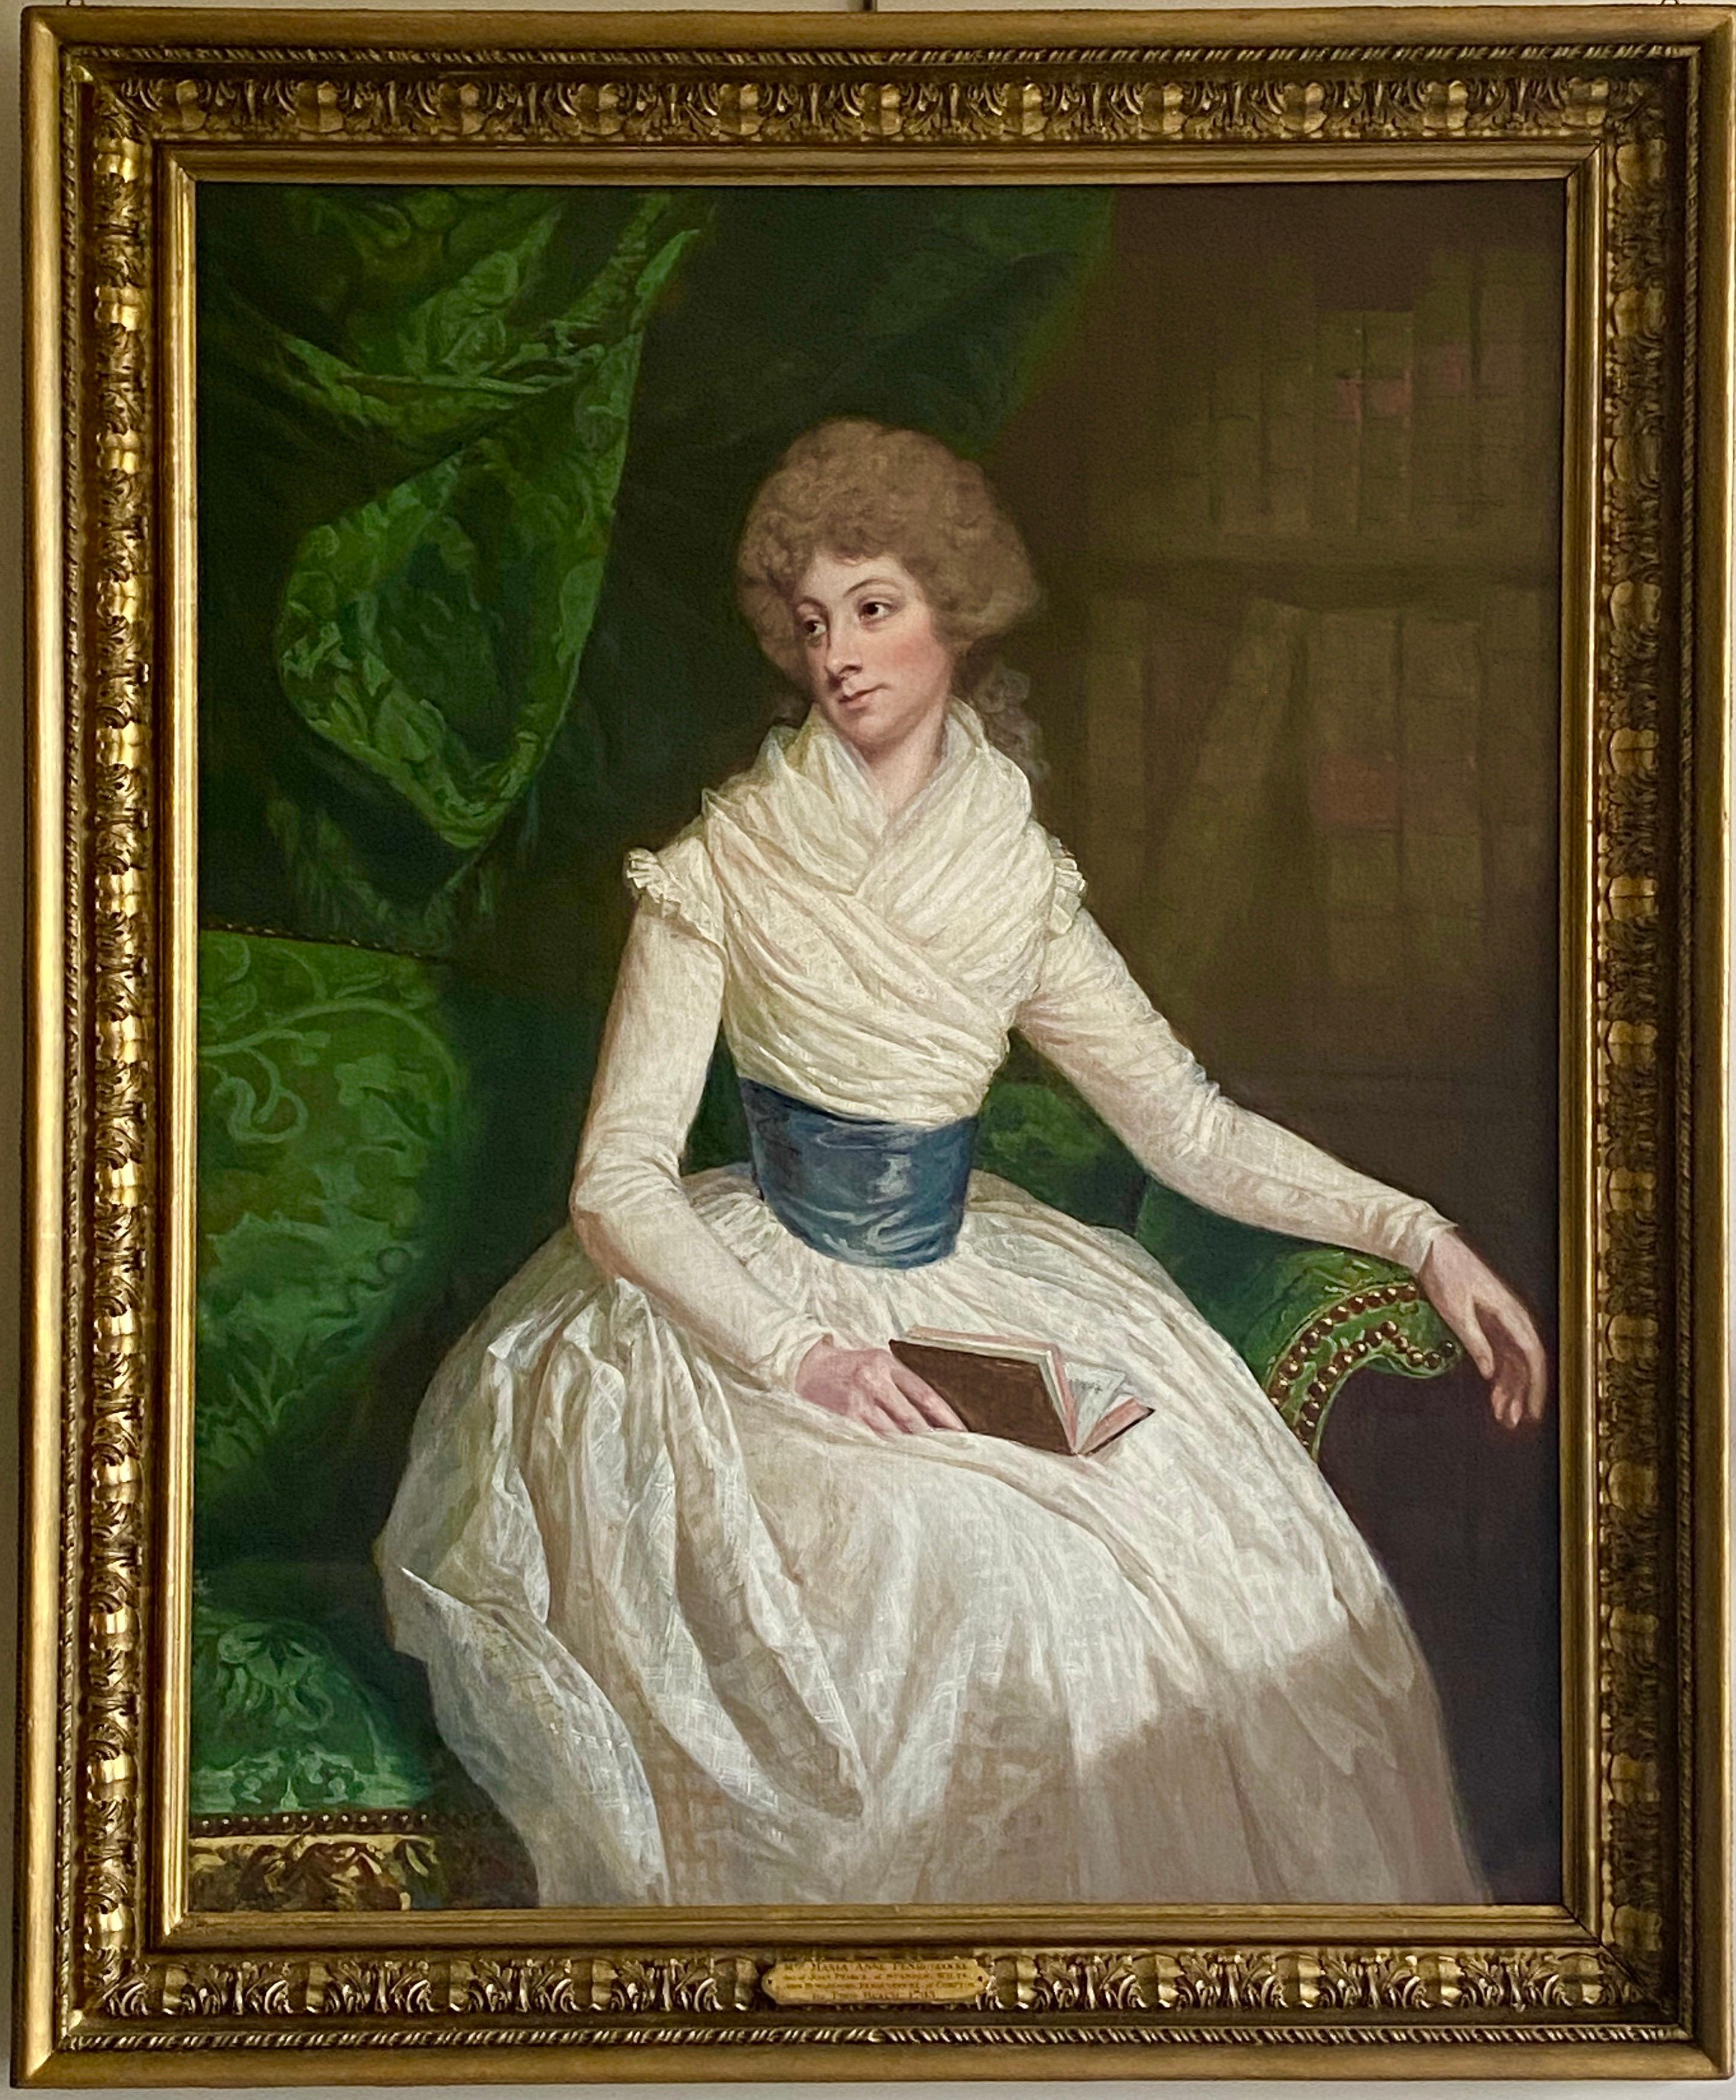 Thomas Beach Interior Painting - English 18th century Portrait of a Lady seated in a Library with a book